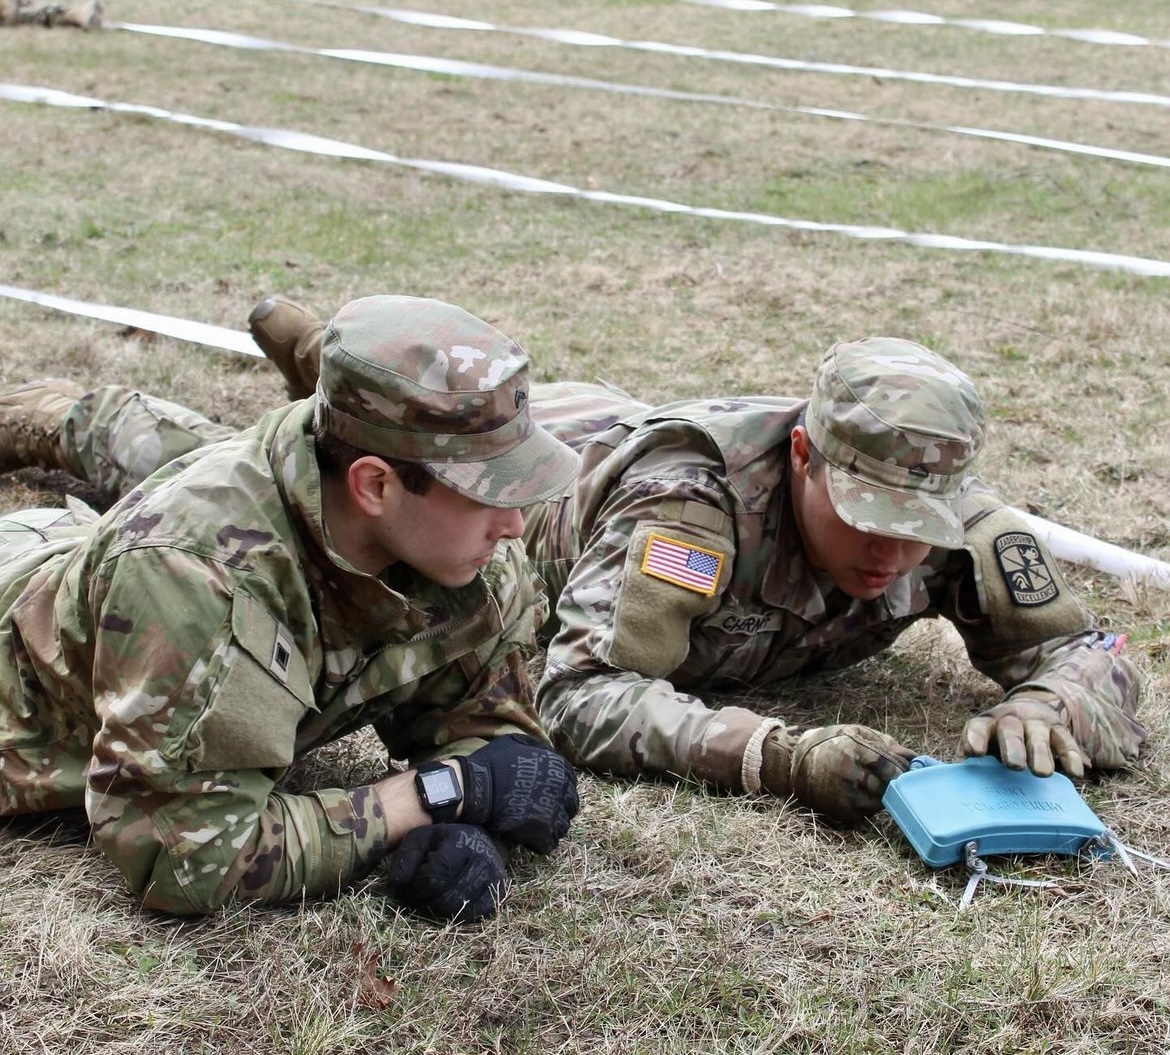 Cadets work on placing claymore mines during joint field training exercises.